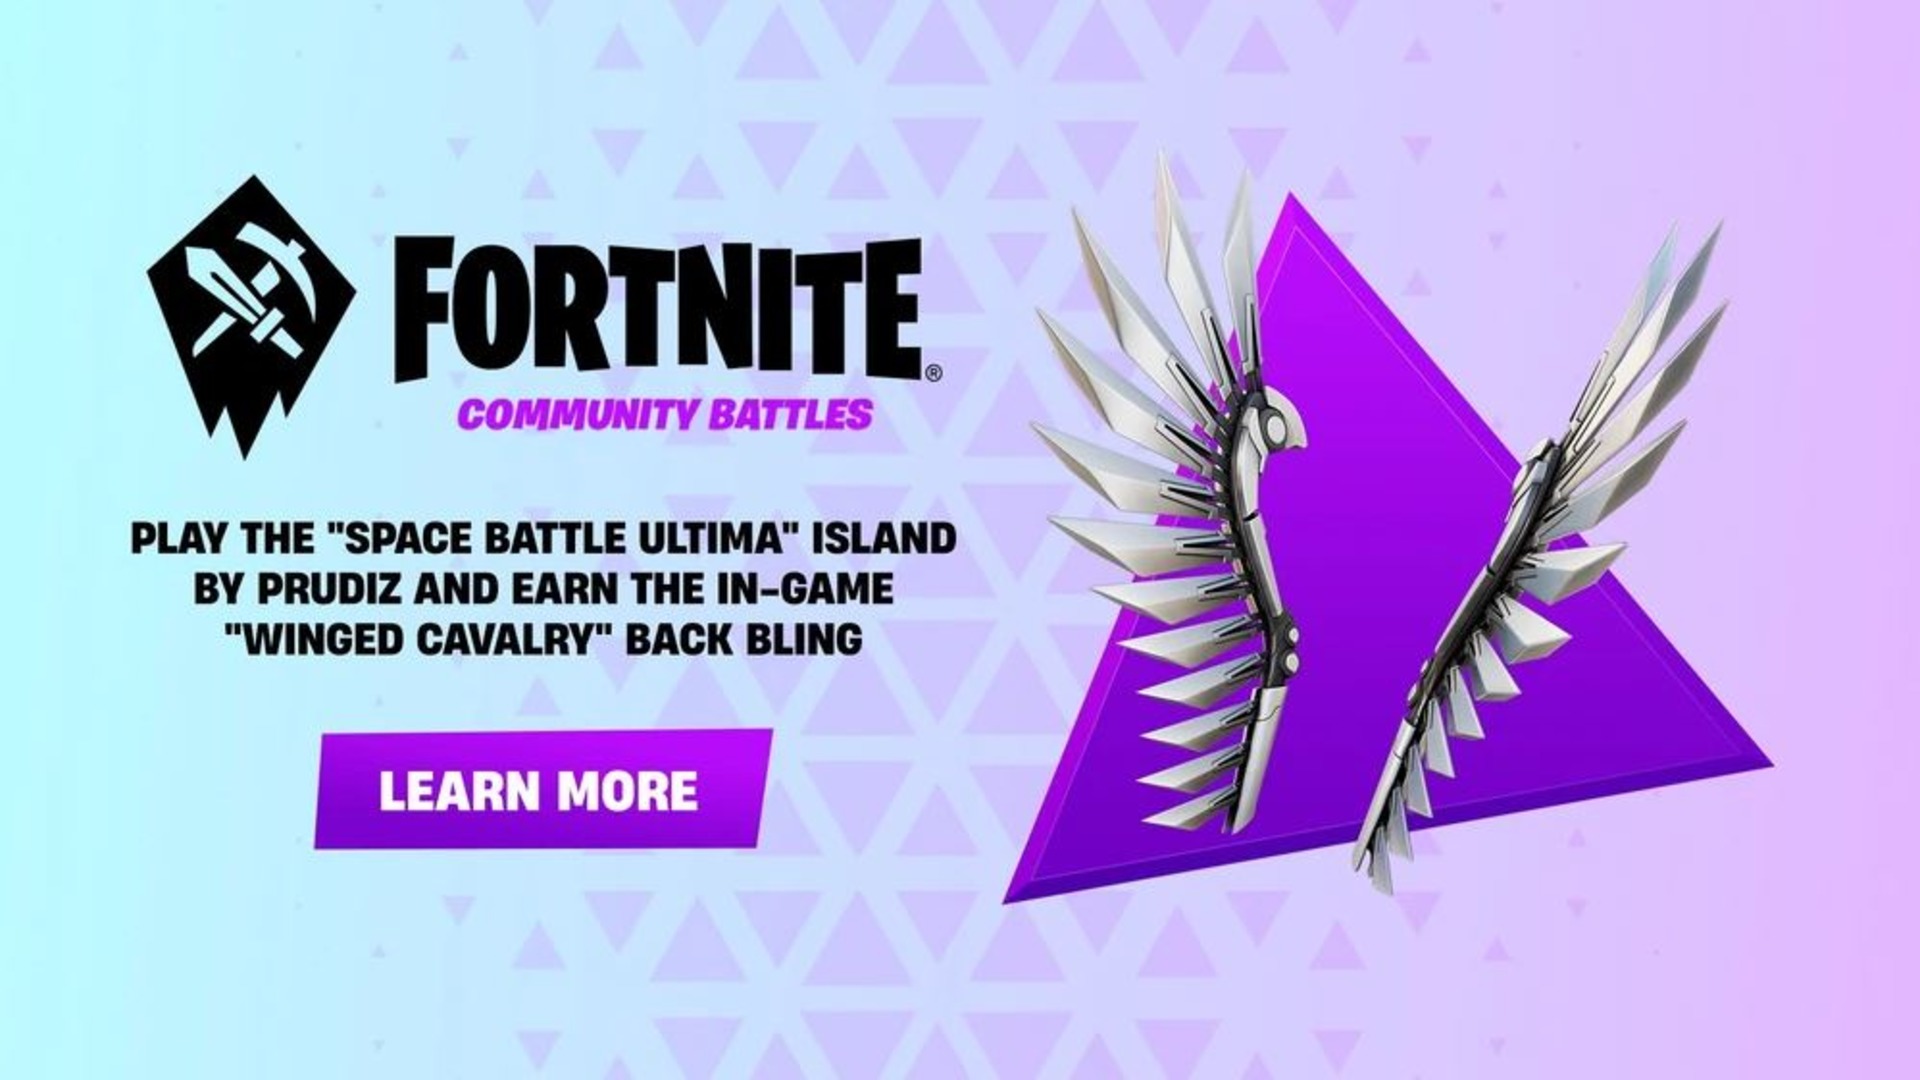 Fortnite Community Battles How to get the Winged Cavalry Back Bling in